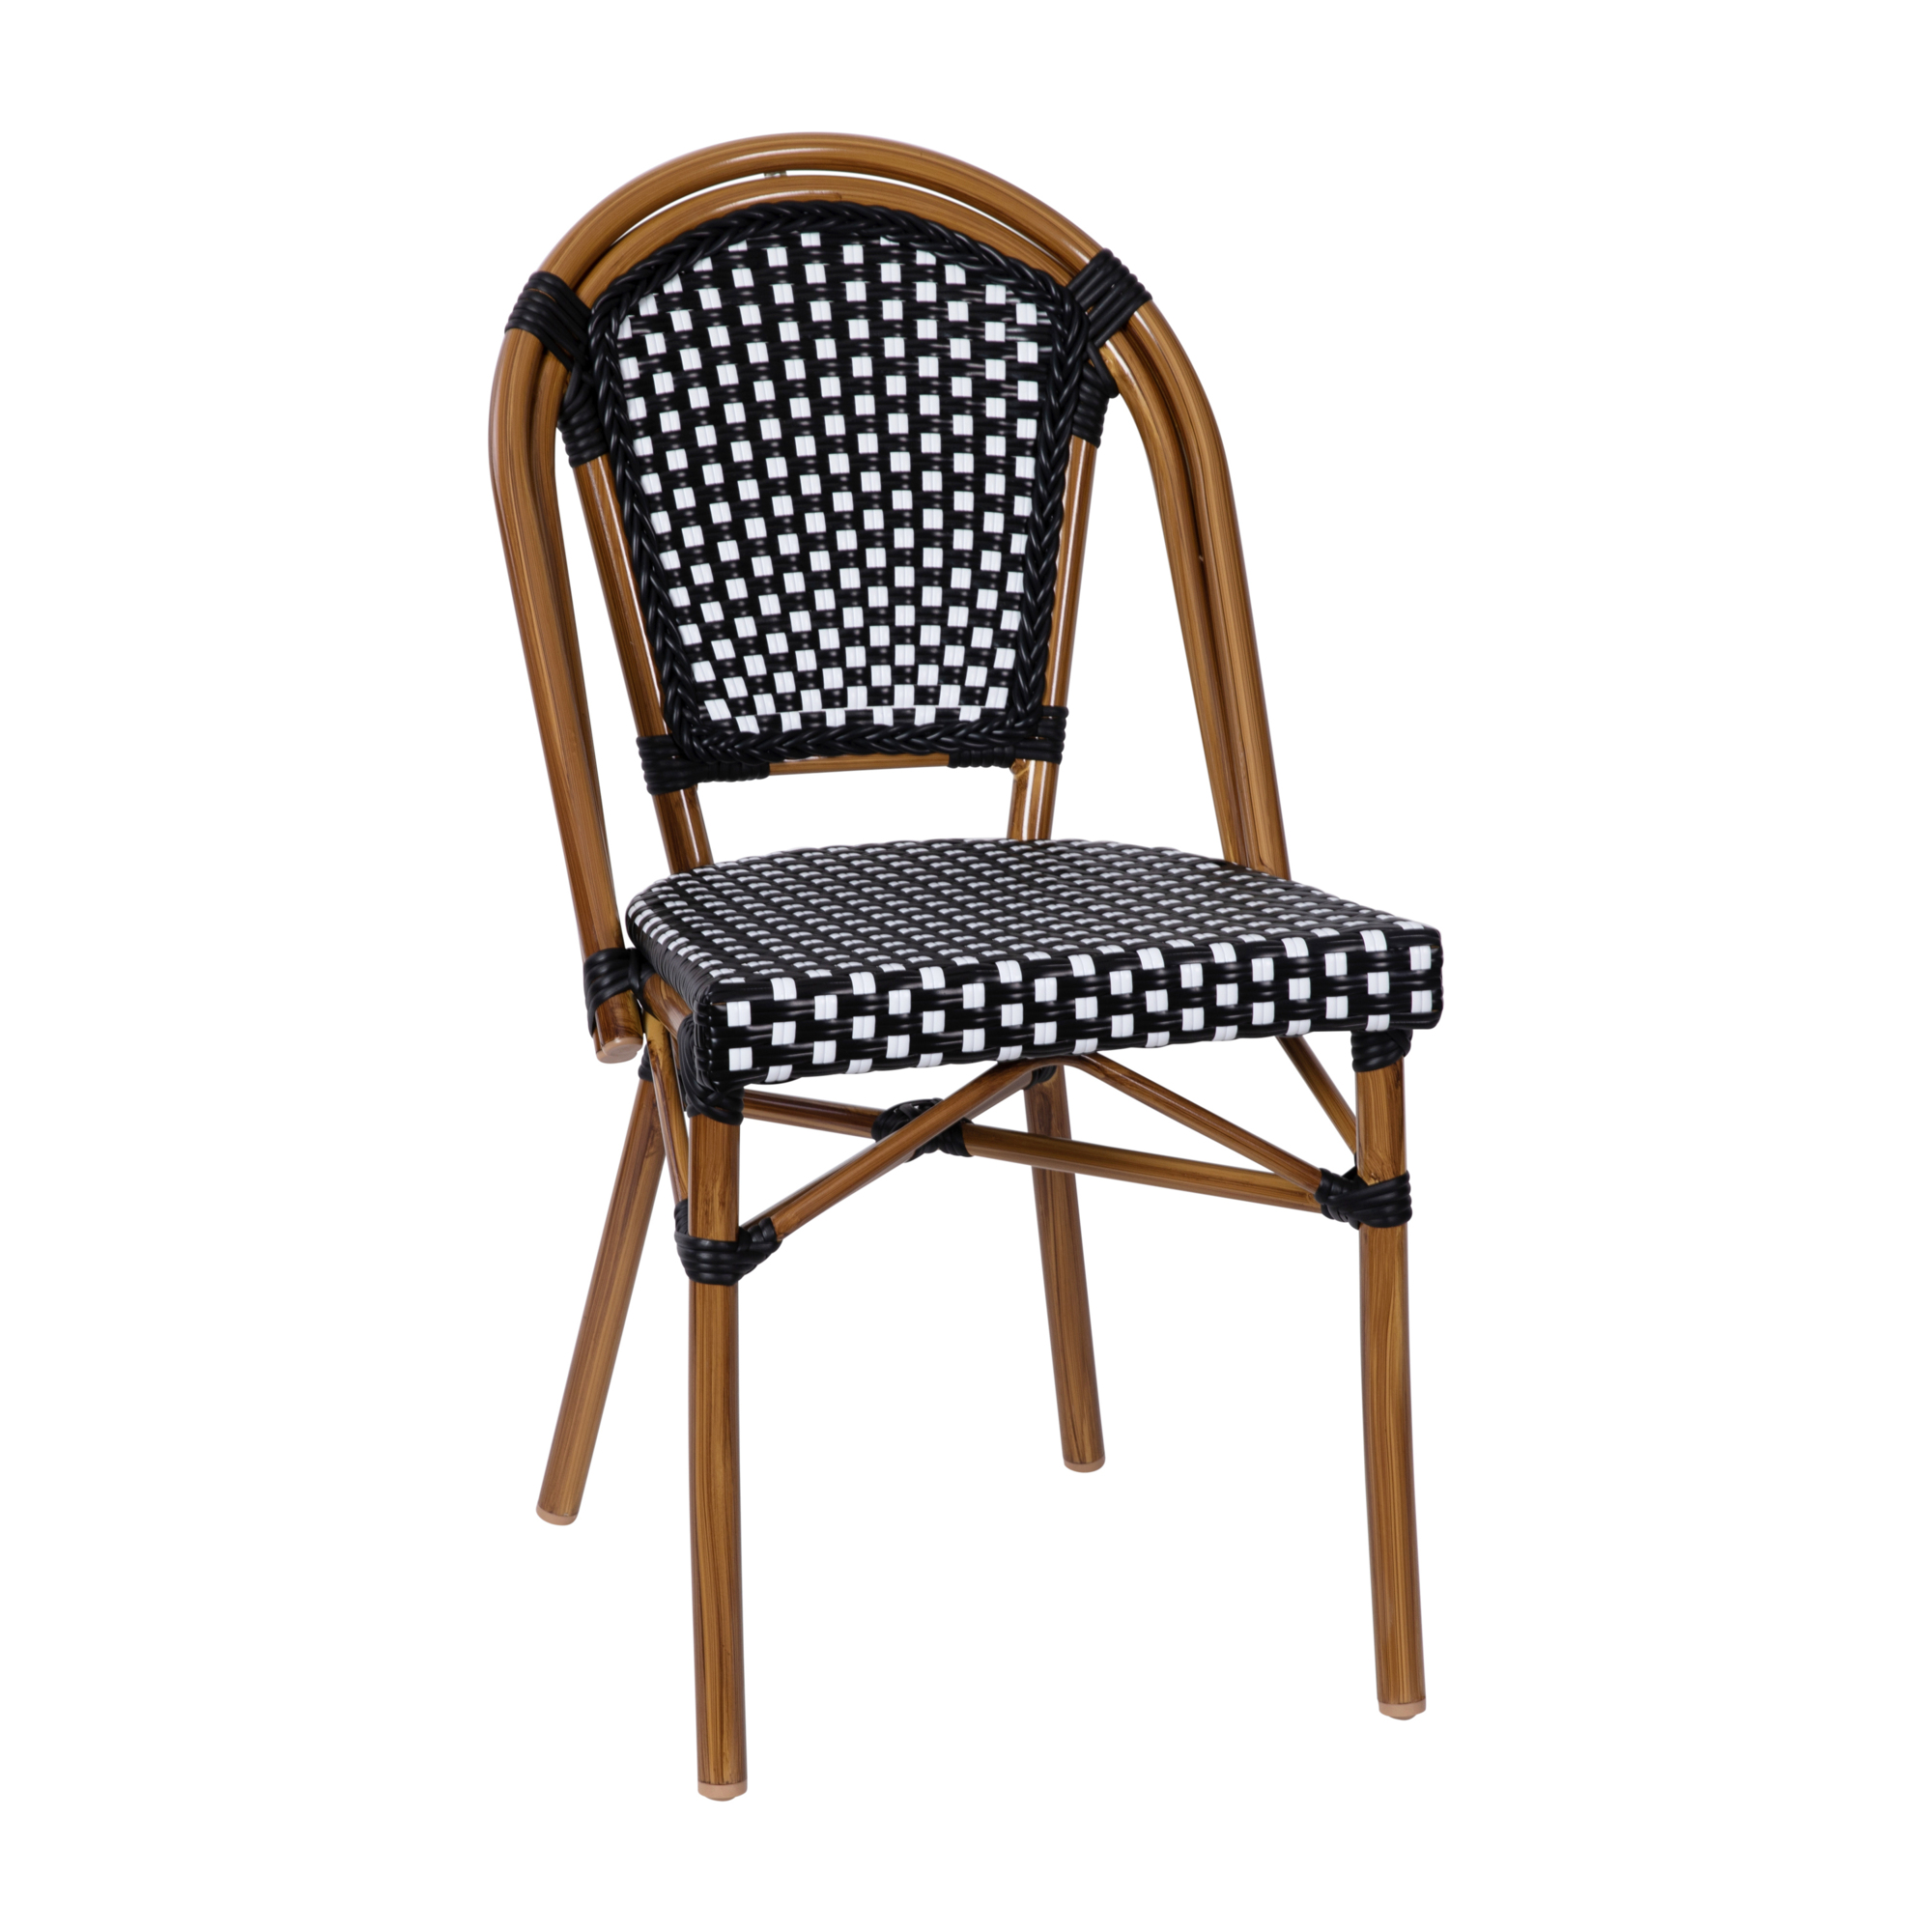 Flash Furniture, Black/White PE Rattan French Bistro Stacking Chair, Primary Color Black, Included (qty.) 1, Model SDA6421BKWHNAT